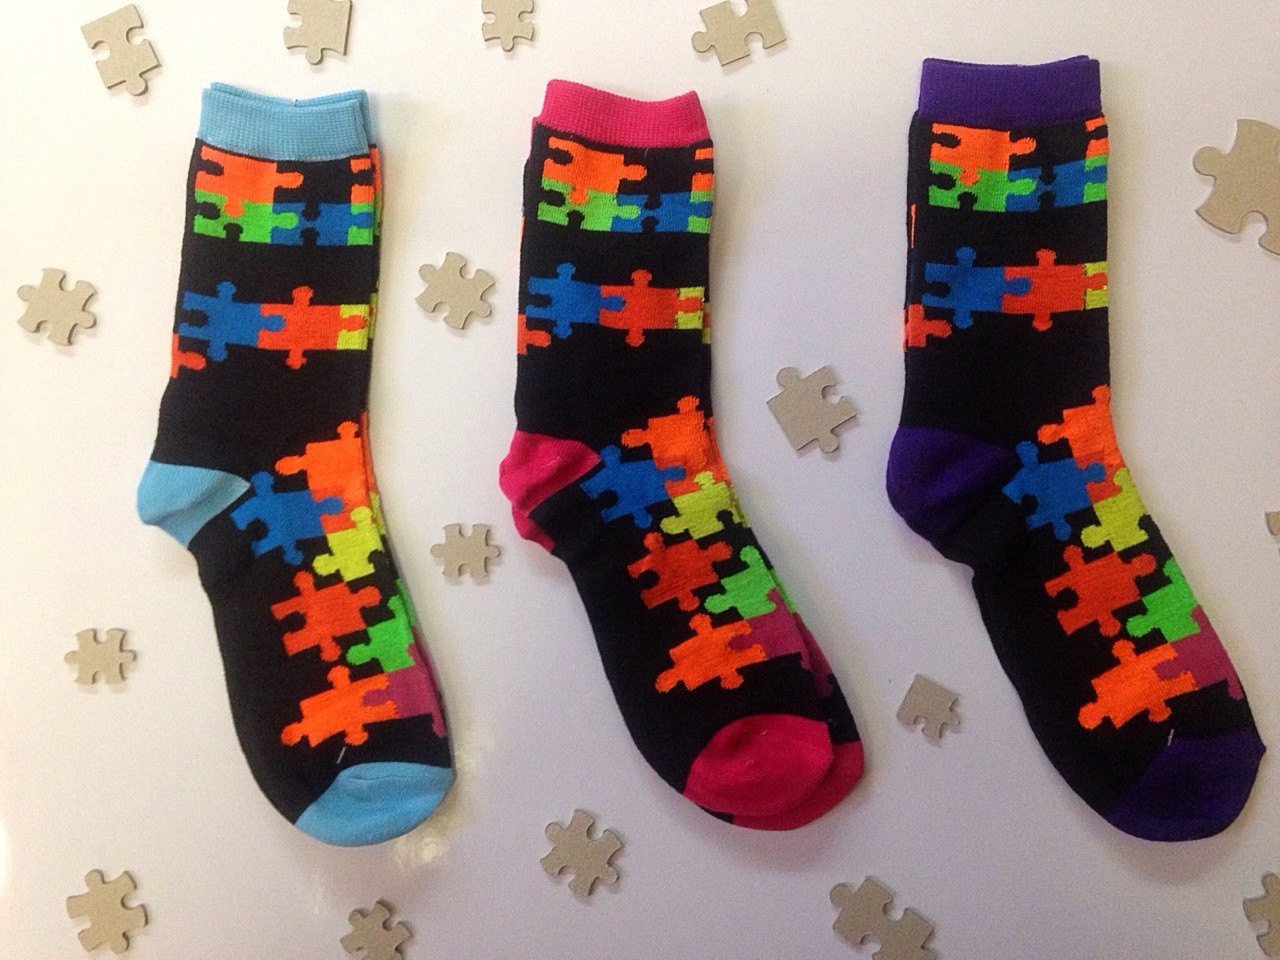 Jigsaw Puzzle Design Socks.  ON SALE.  Grab a few pair of puzzle socks. The Missing Piece Puzzle Company